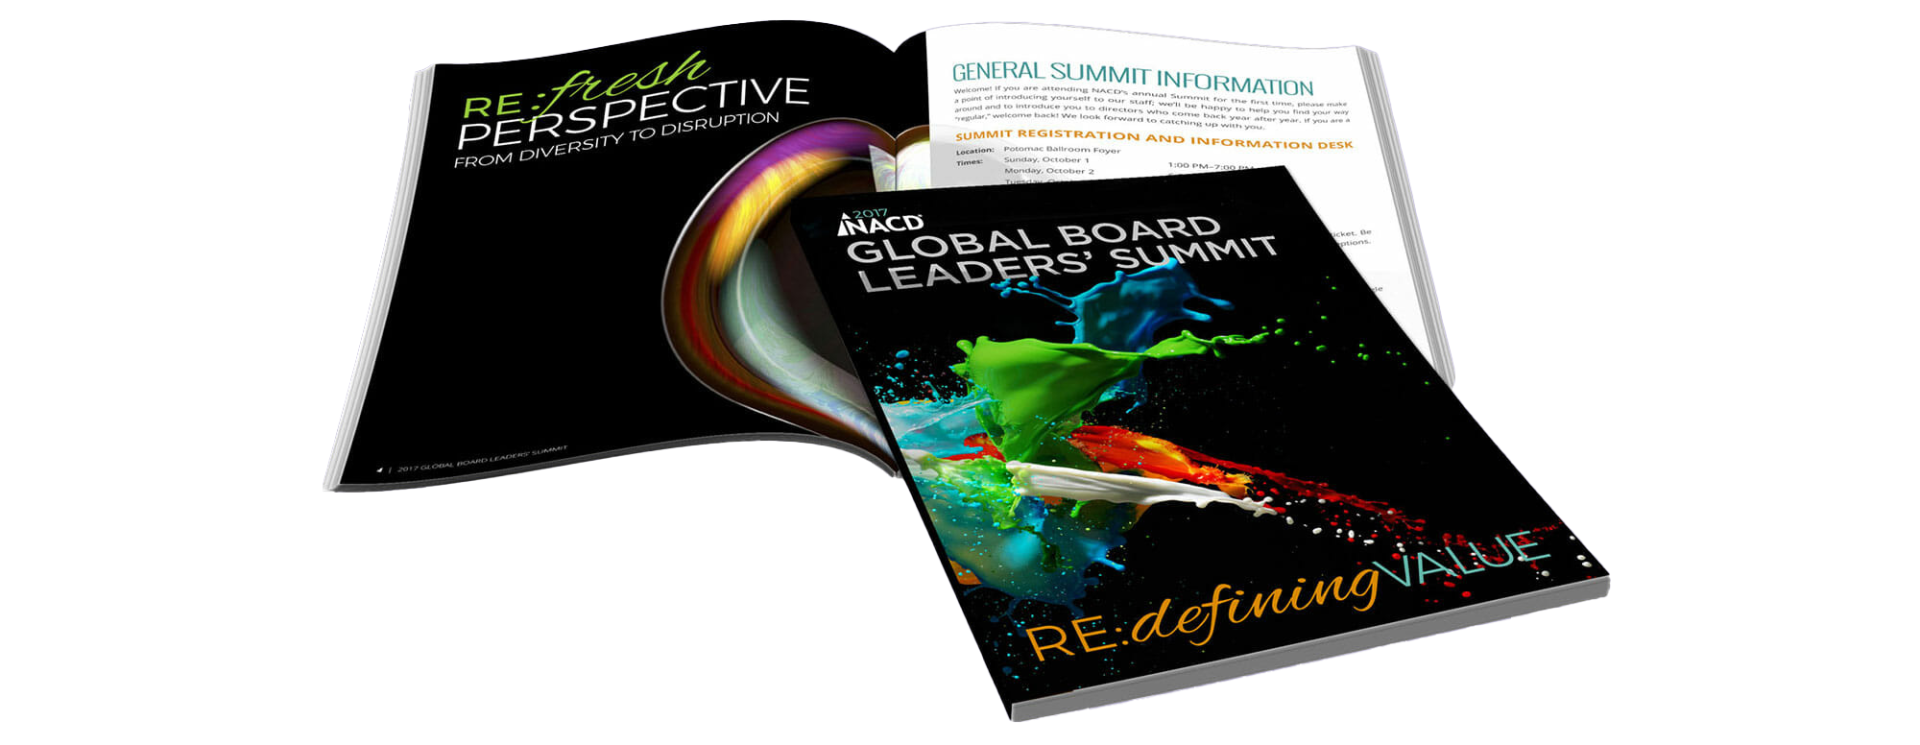 A vibrant brochure for the NACD Global Board Leaders' Summit featuring a splash of dynamic colors, emphasizing themes of refreshing perspective and redefining value.